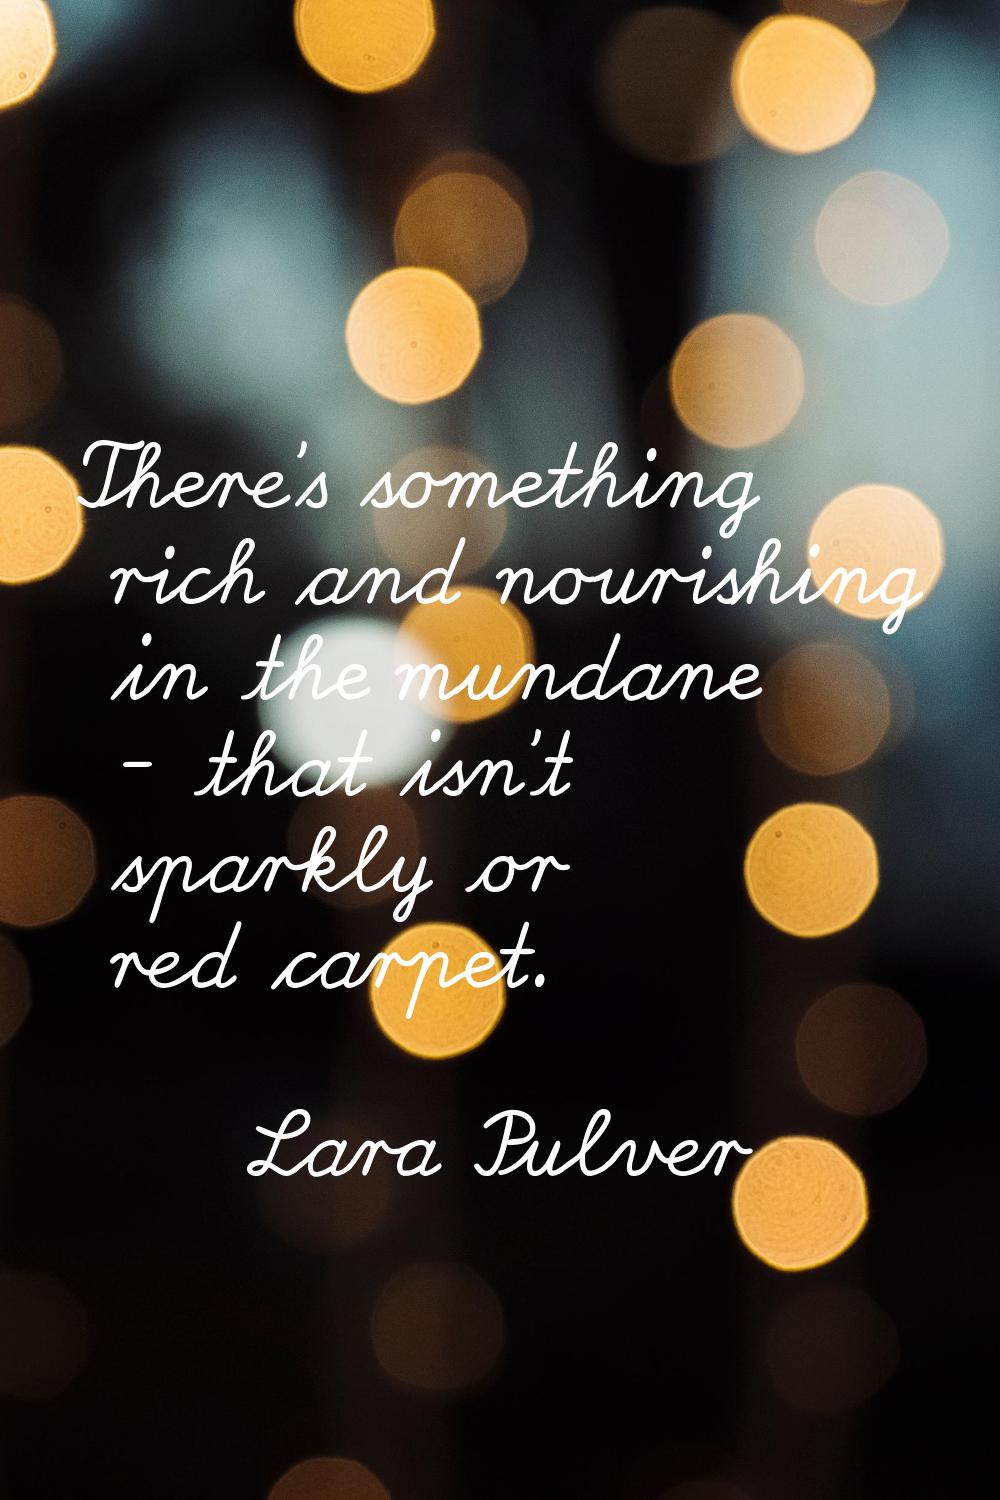 There's something rich and nourishing in the mundane - that isn't sparkly or red carpet.